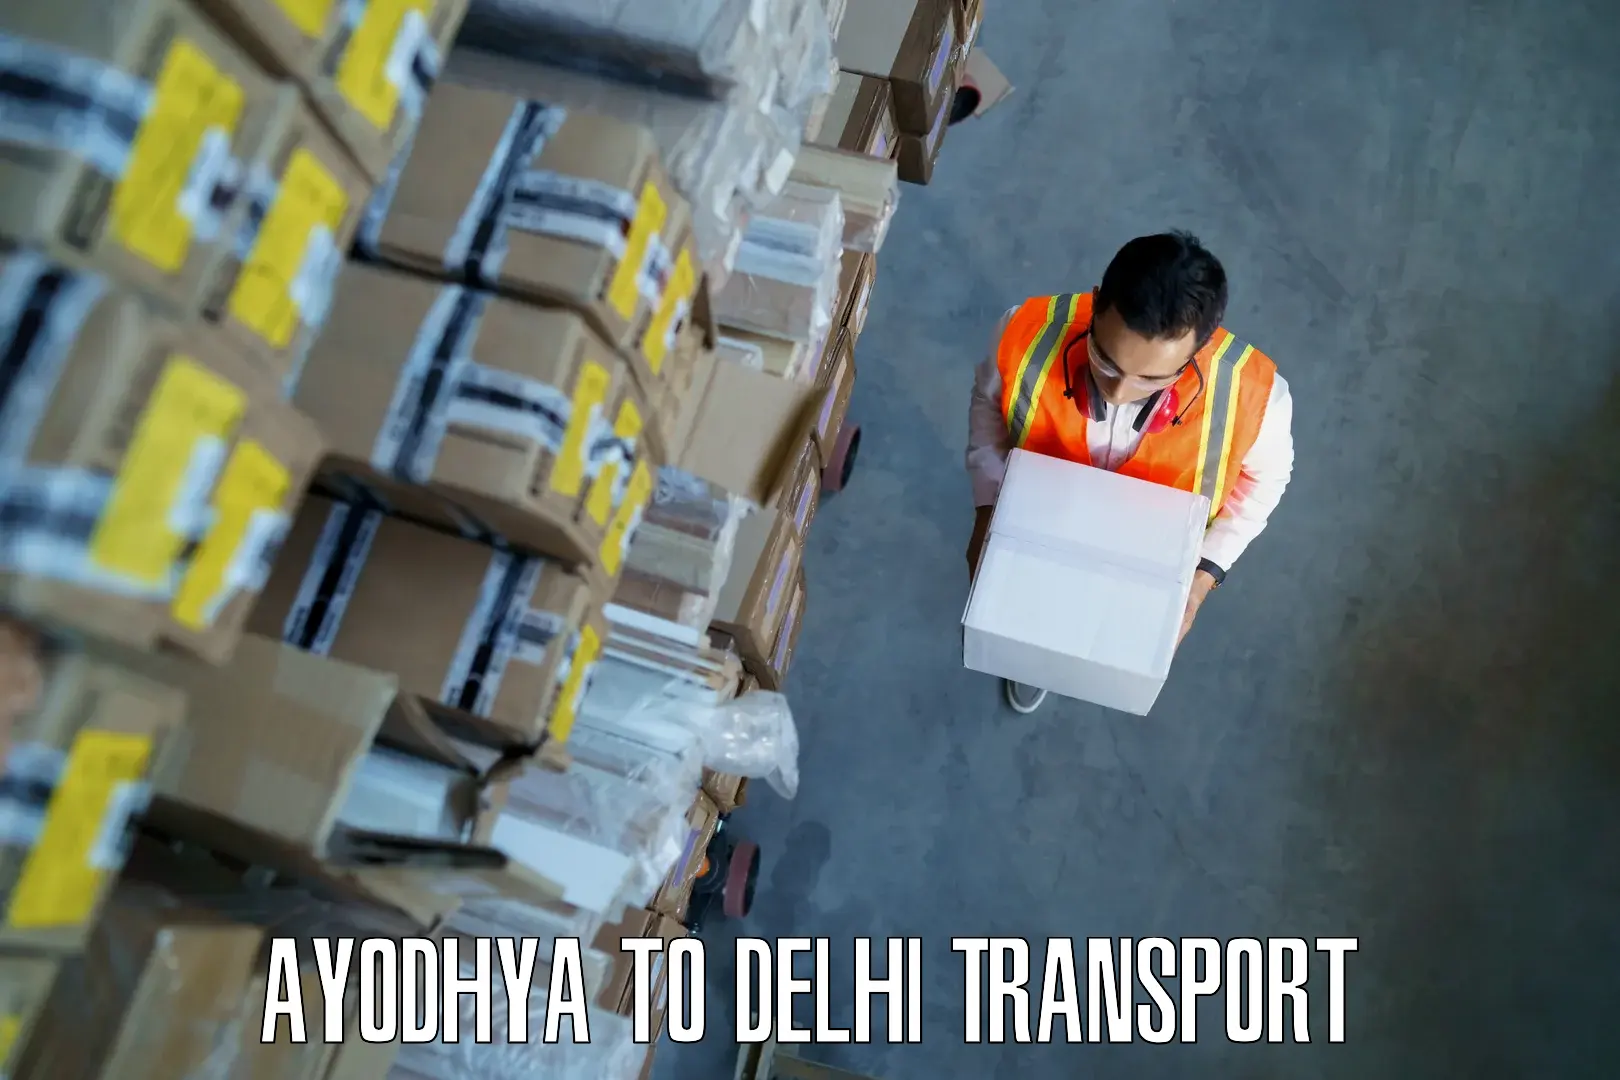 Daily transport service Ayodhya to Lodhi Road